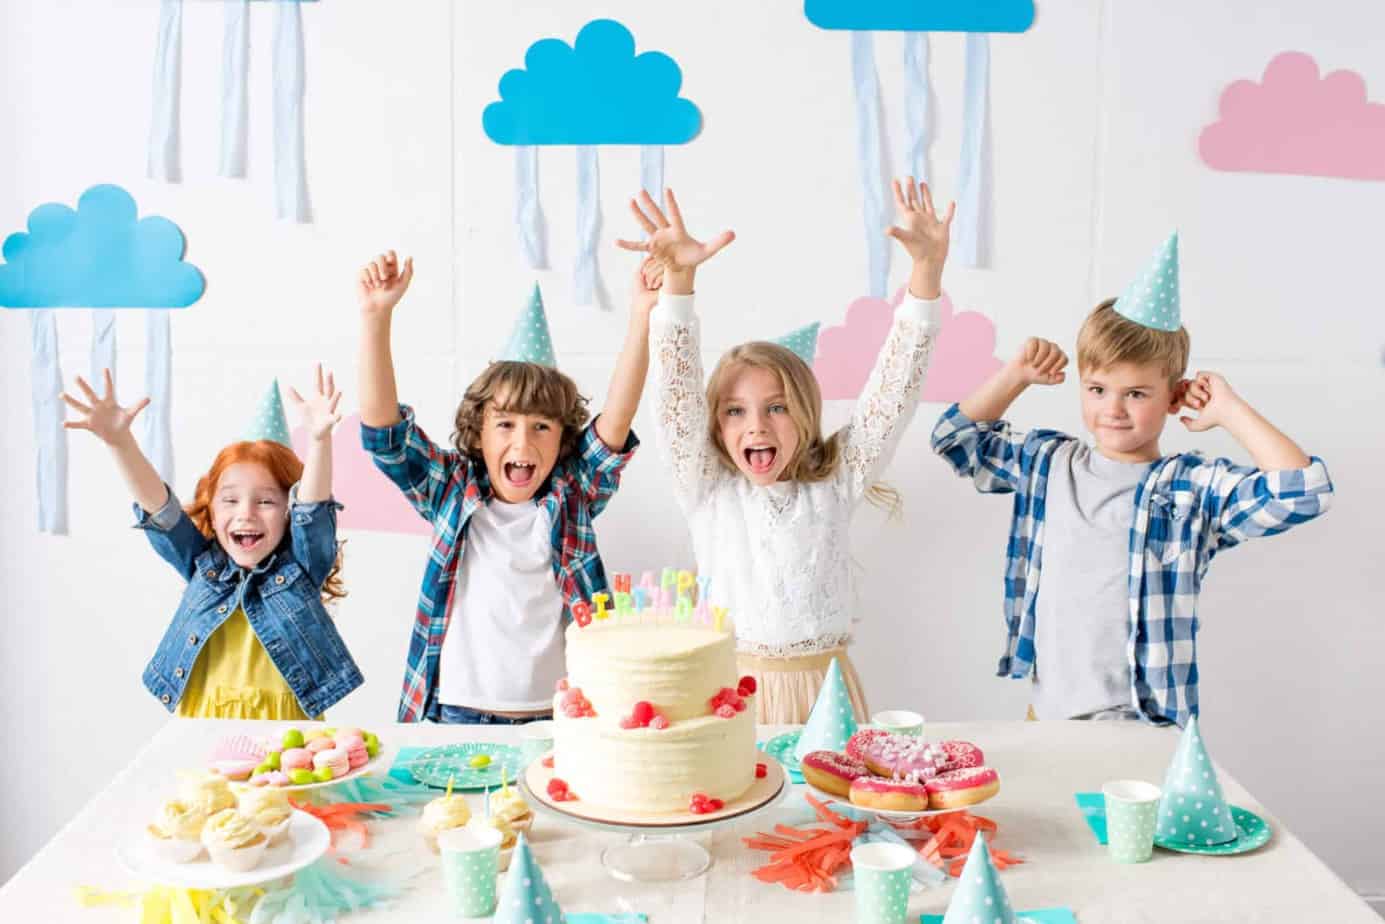 15 Tips for Throwing a Kid's Birthday Party on a Budget